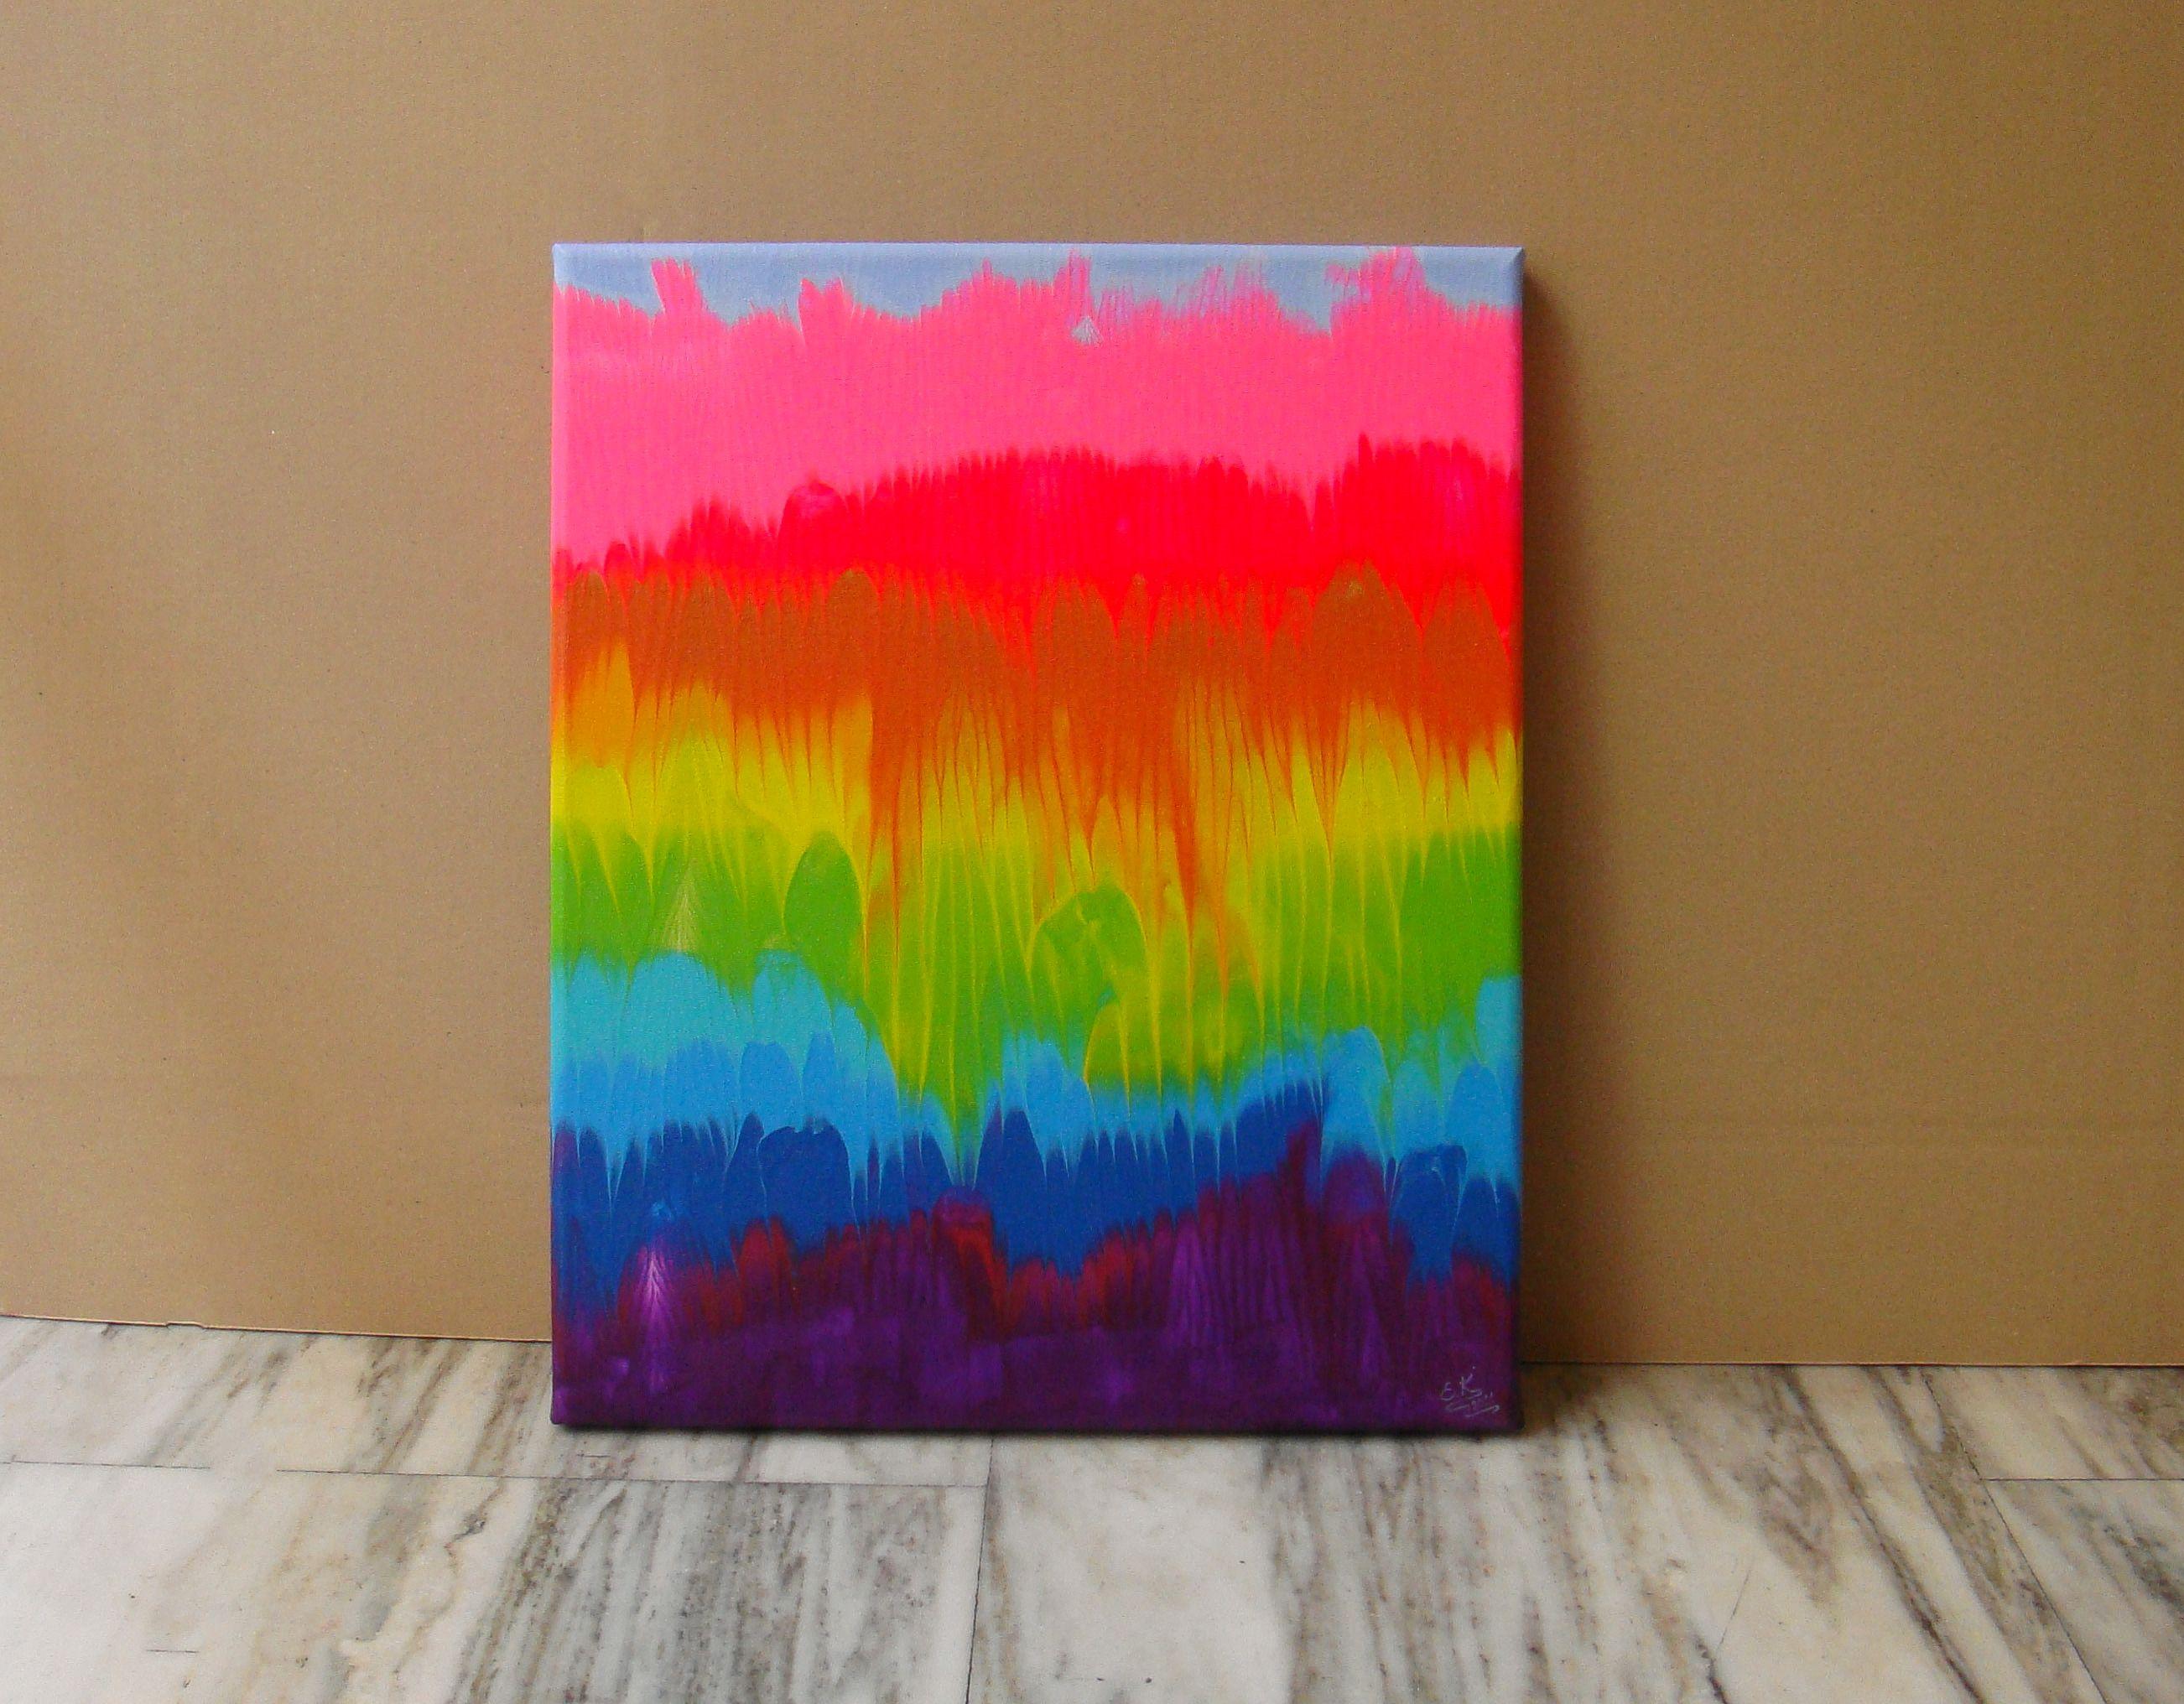 Abstract Painting on Canvas  The painting depicts an iridescent blend of rainbow colors that are painted horizontally. Vibrant and dynamic colors of the rainbow symbolize our hopes for a brighter future and make us forget about all our troubles and